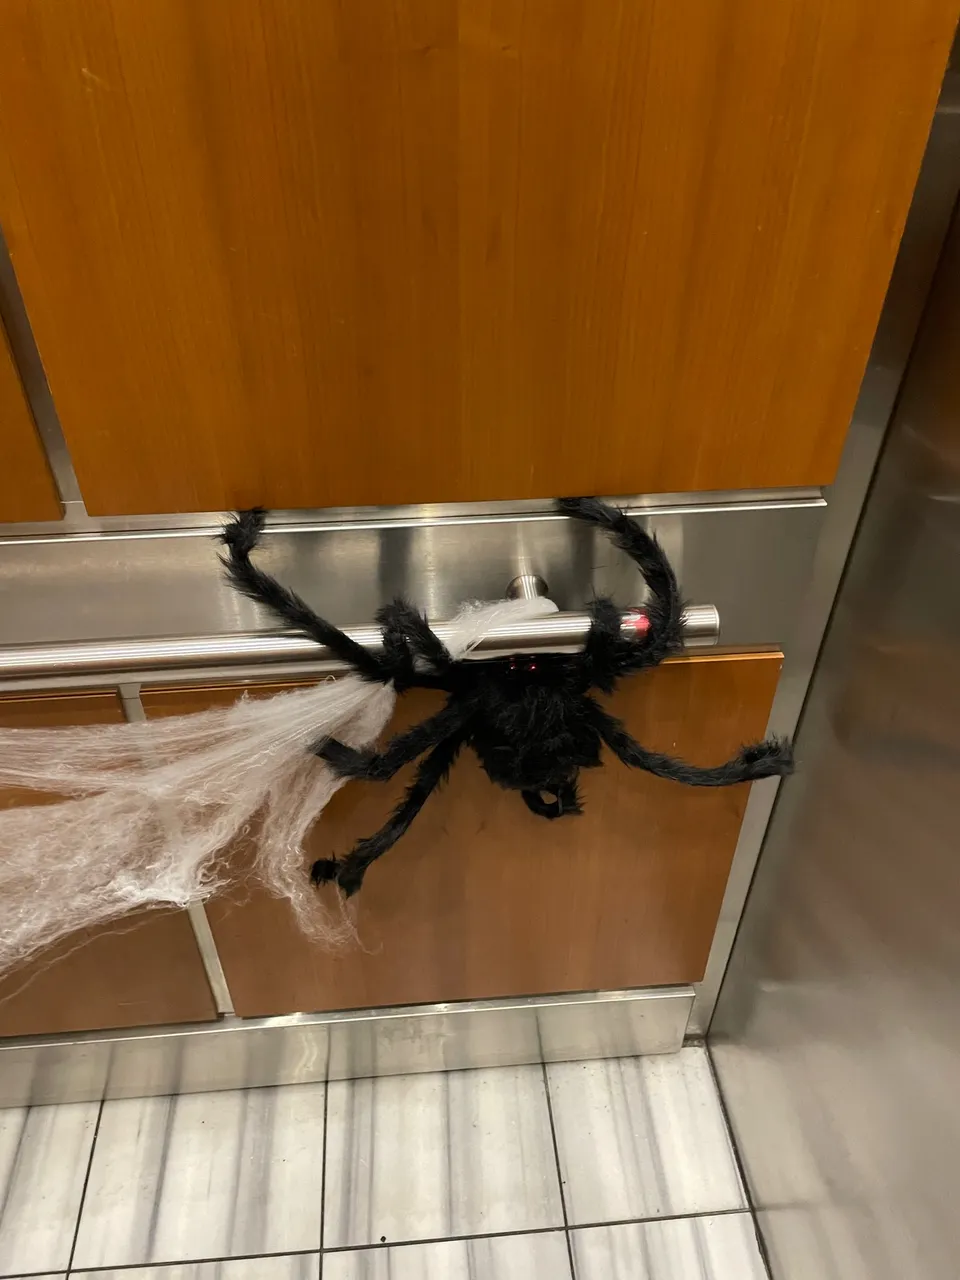 a large black spider hanging from a door